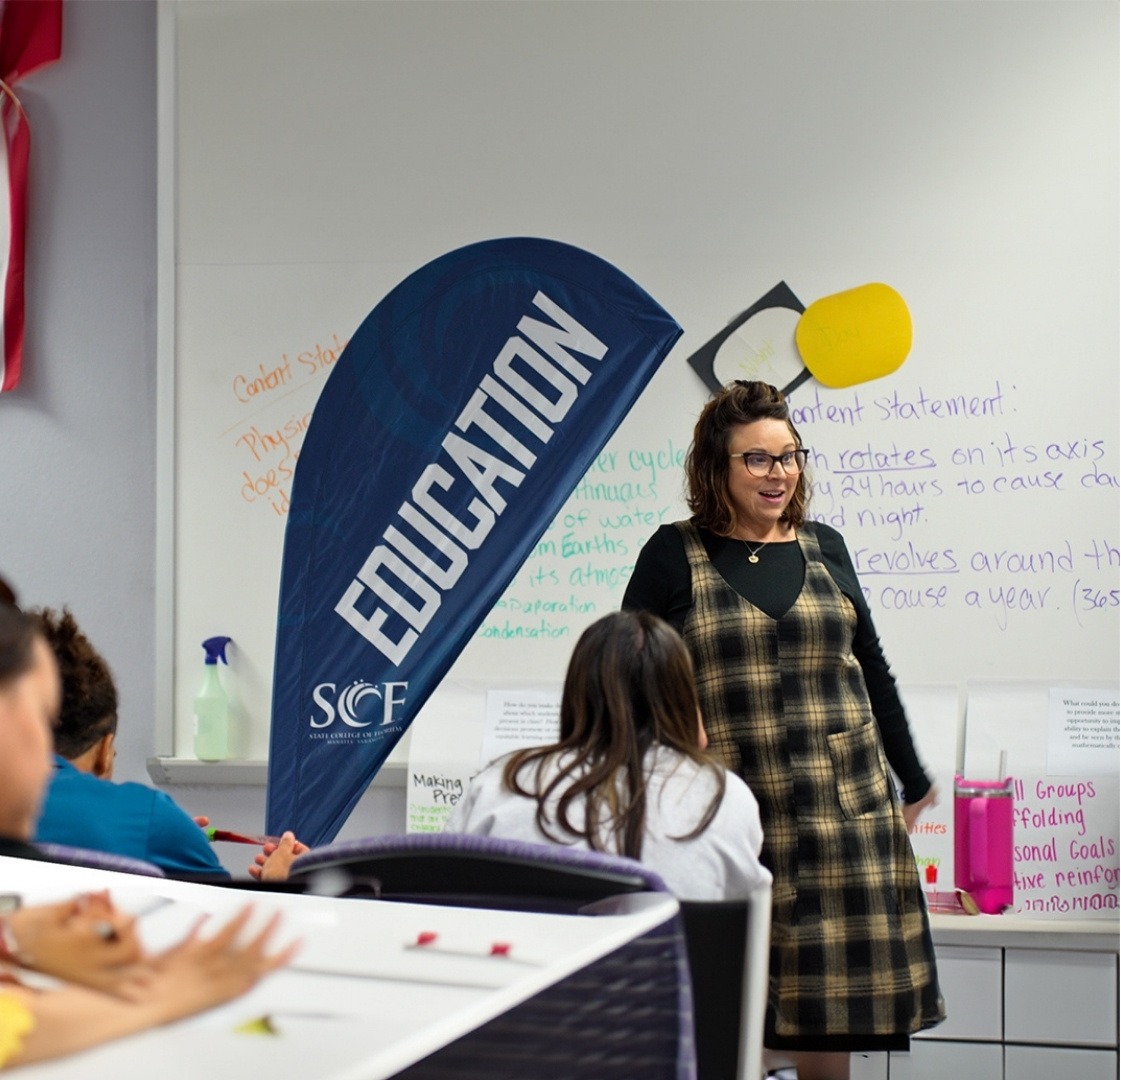 Teacher stands at the whiteboard at the front of a classroom with "education" banner